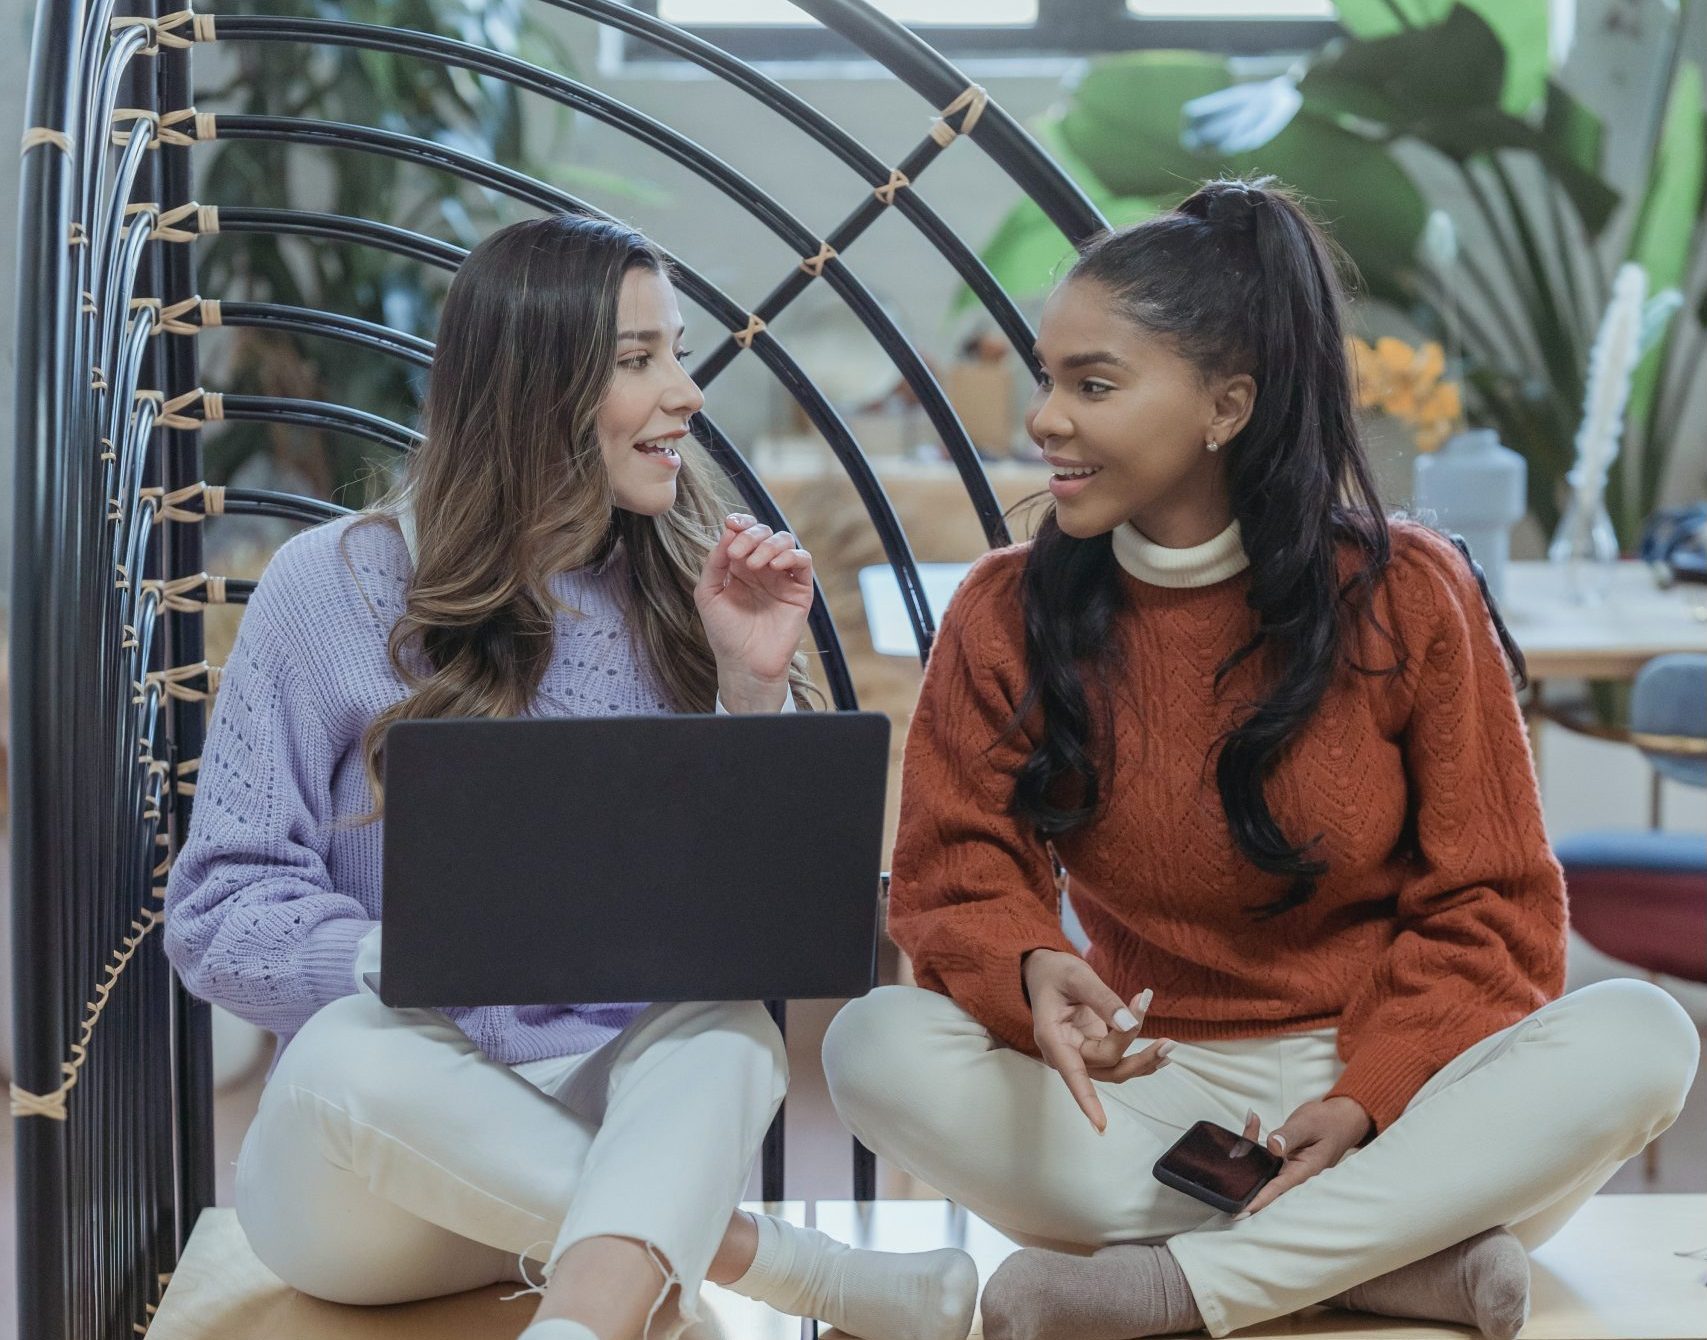 Two young women sit with a laptop in front of them. They look at each other and smile.